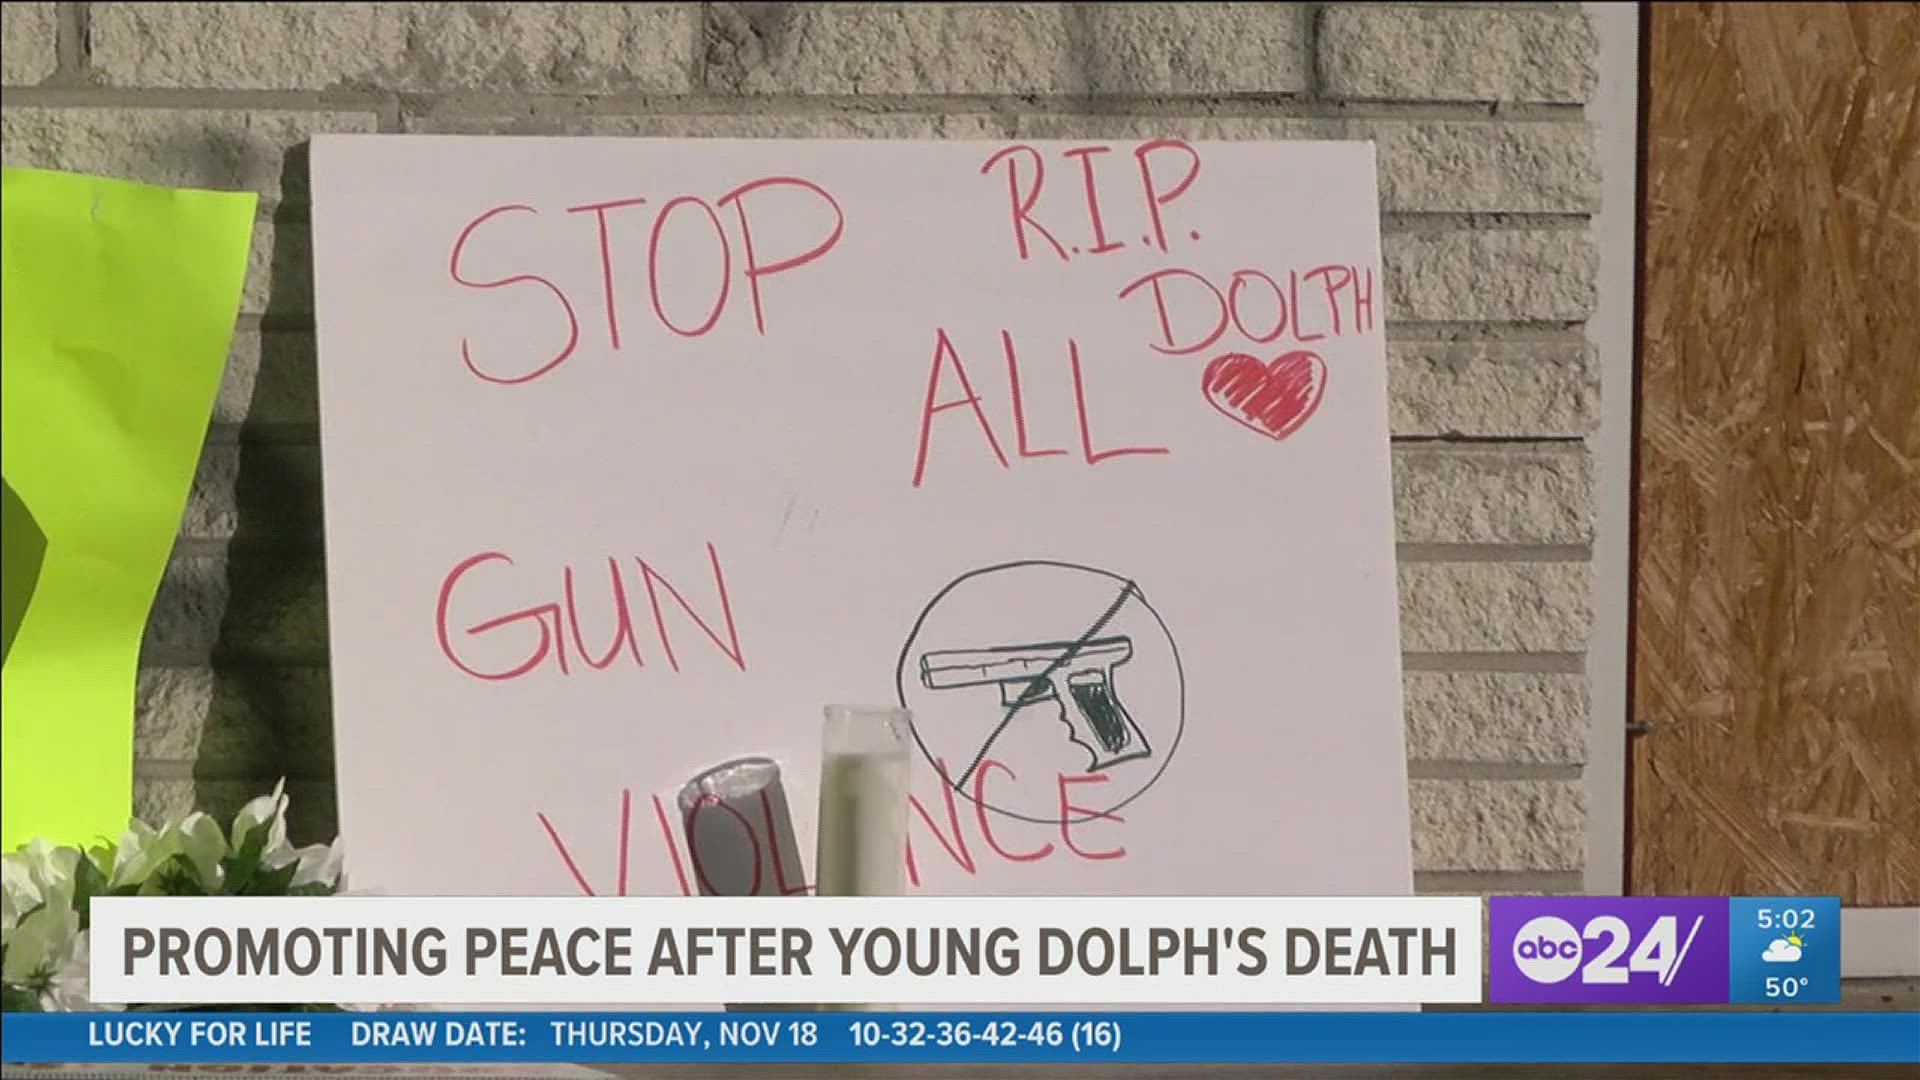 Members say they've reached out to nearly 1000 contacts and closely monitored online chatter since Young Dolph's killing on Airways Boulevard Wednesday.